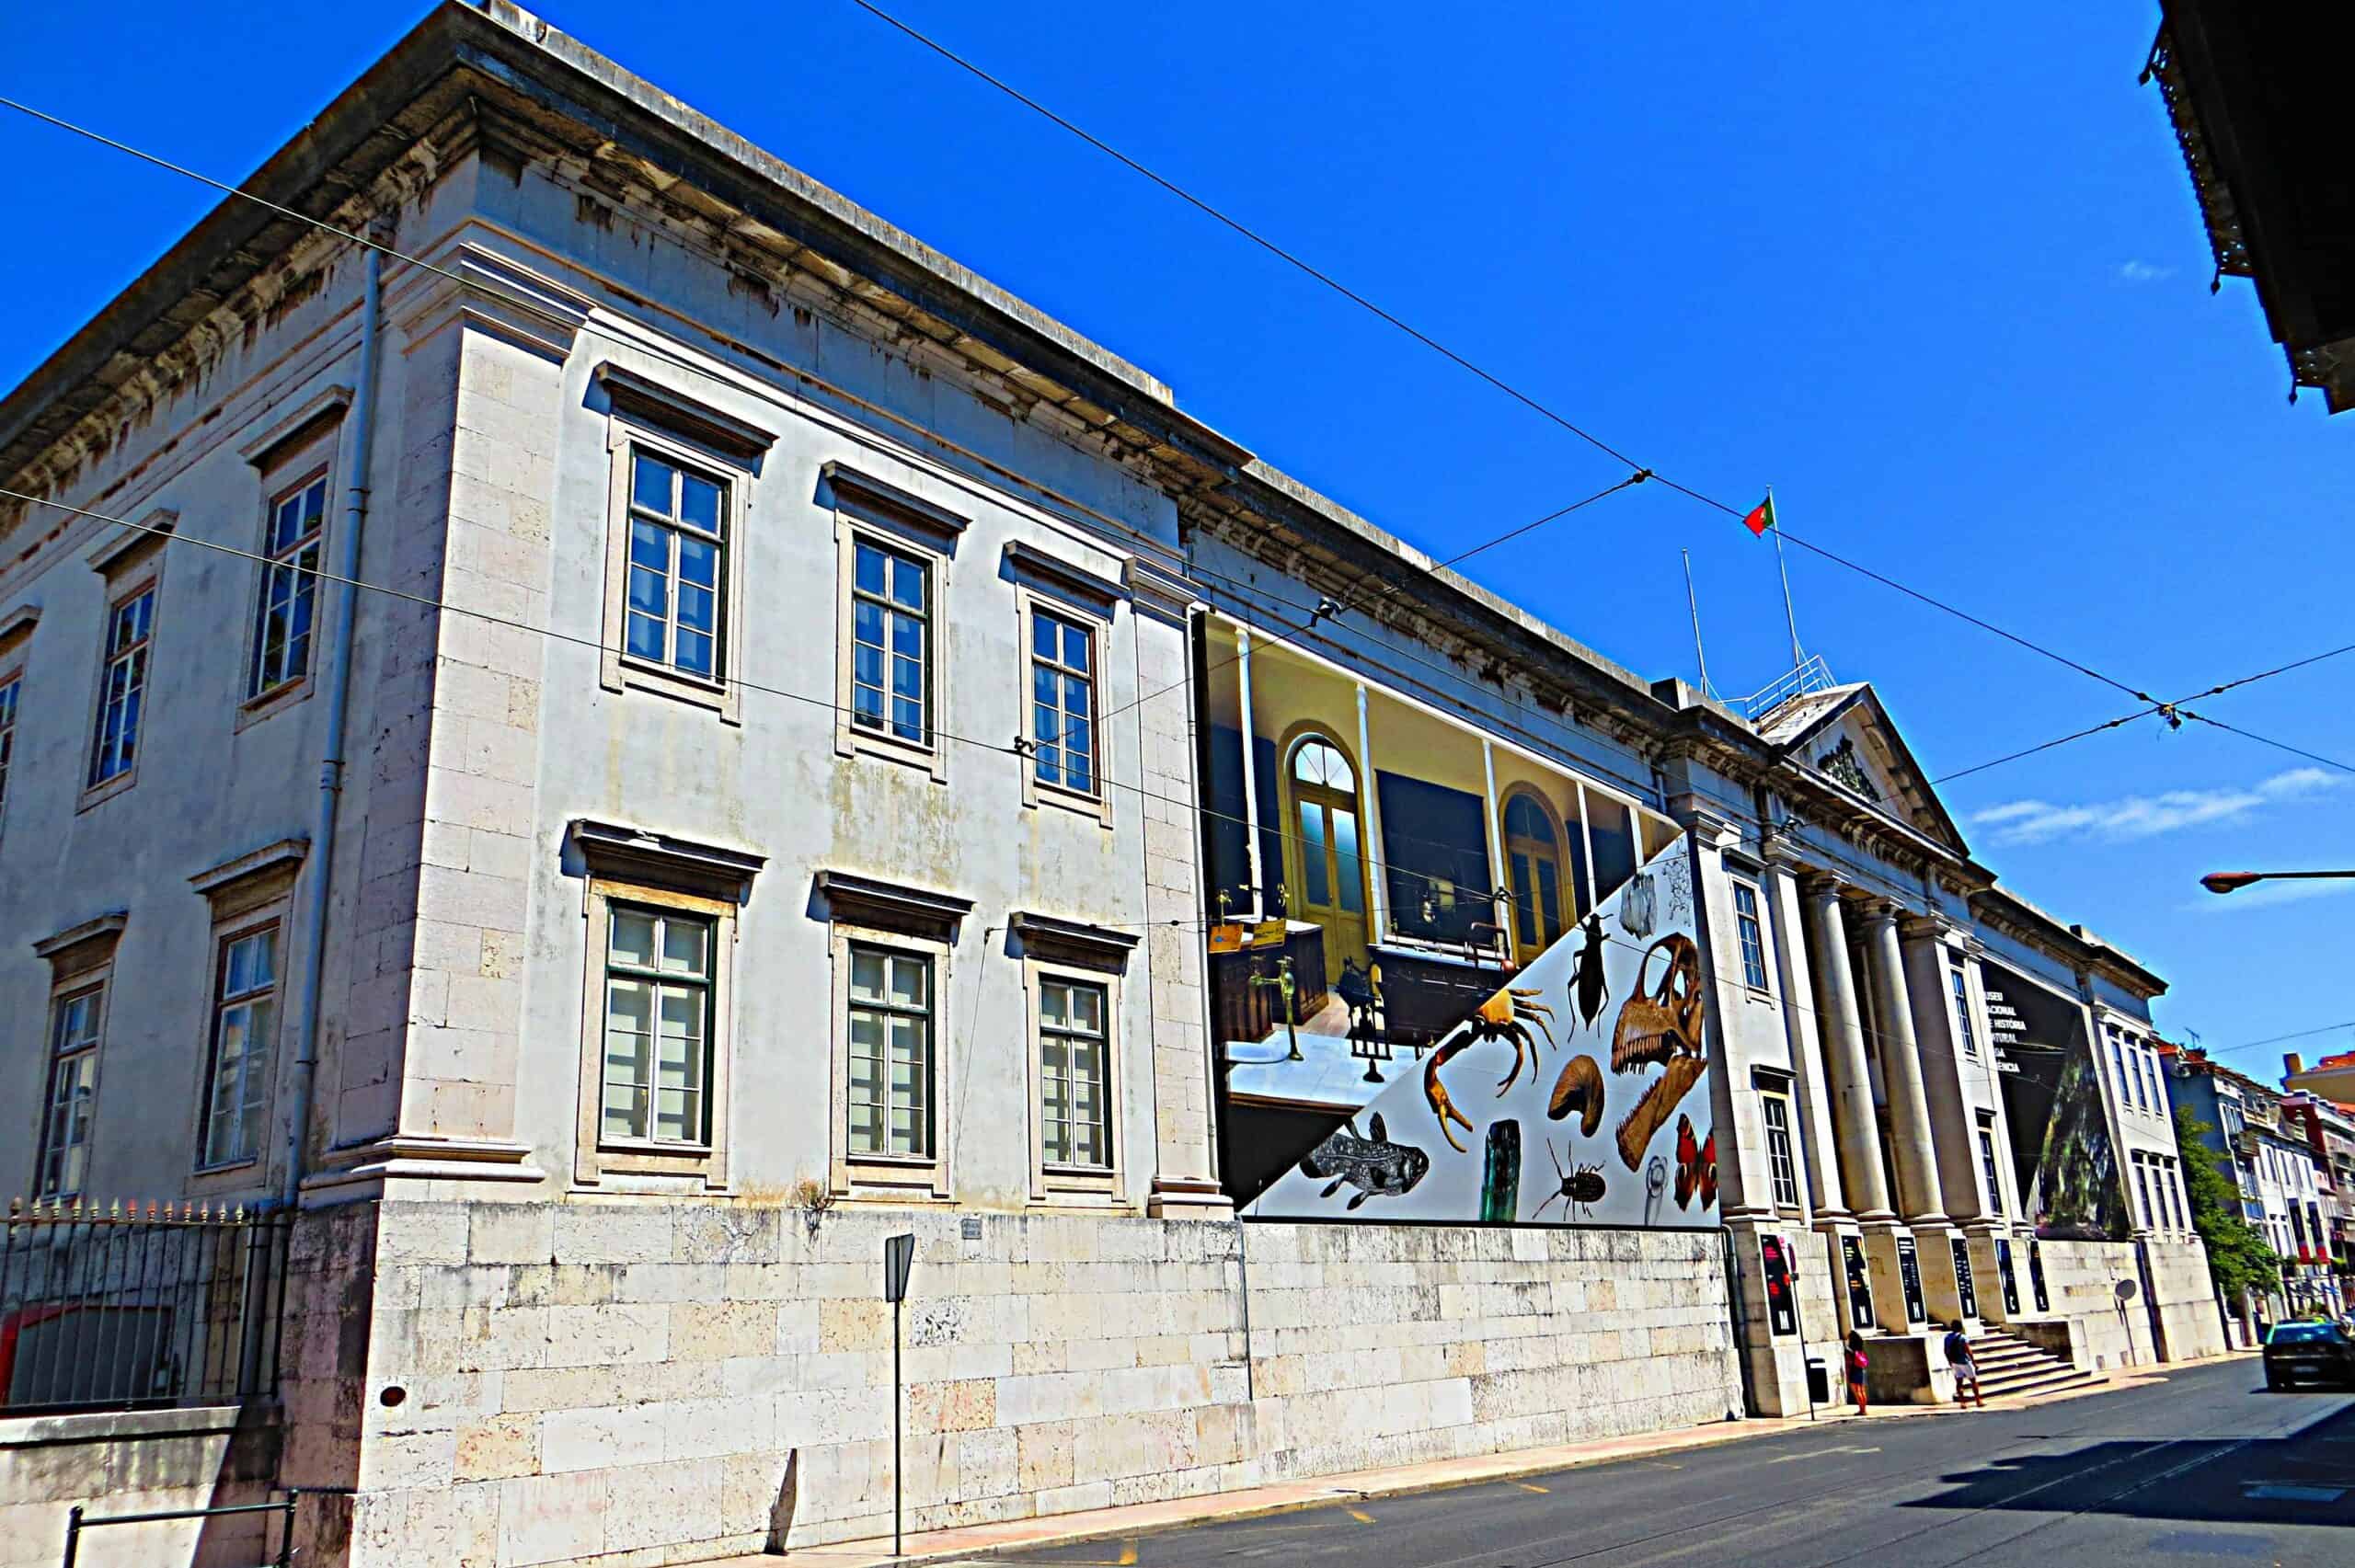 National museum of Portugal